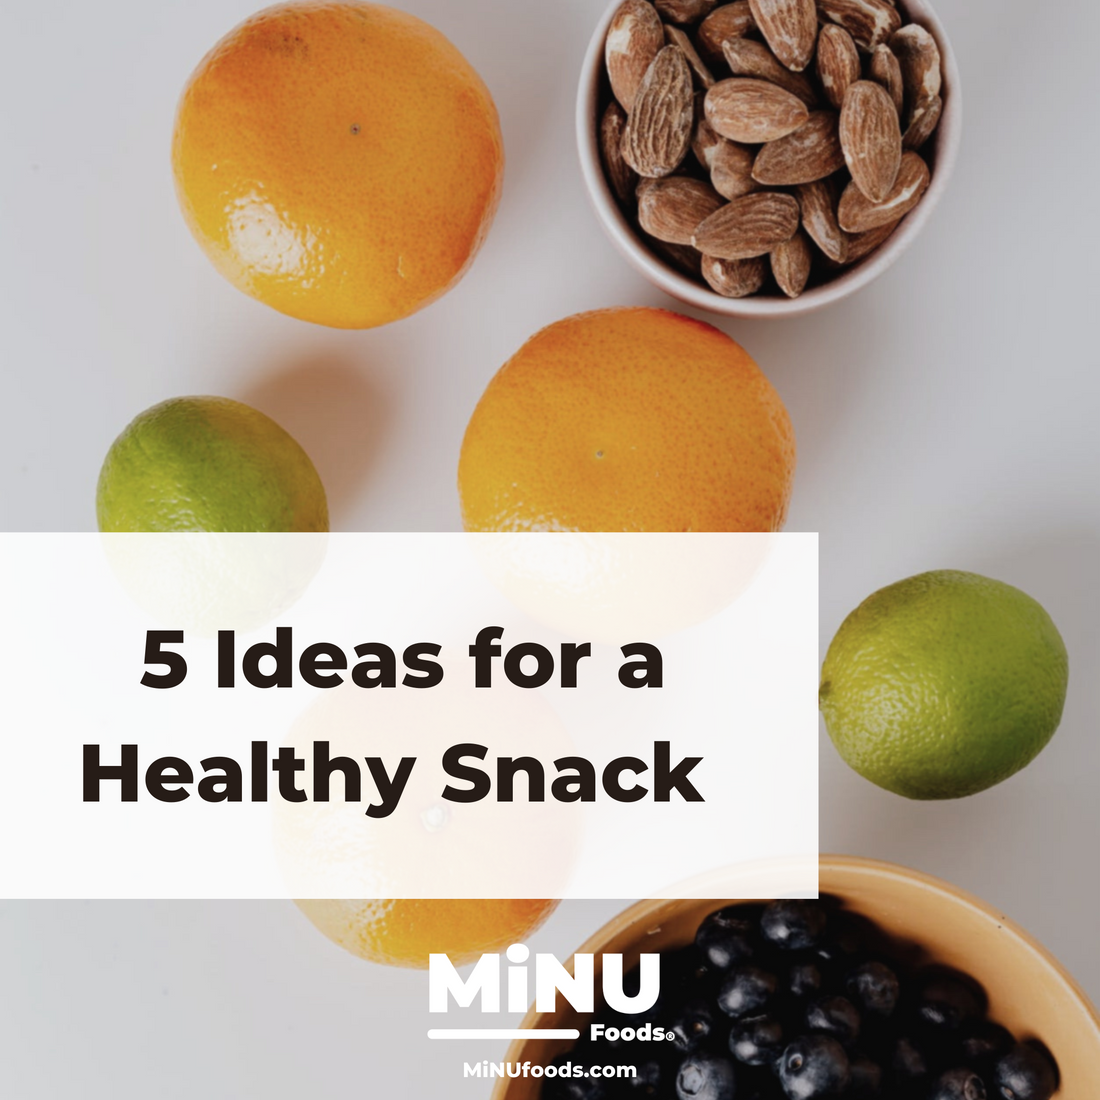 5 Ideas for a Healthy Snack